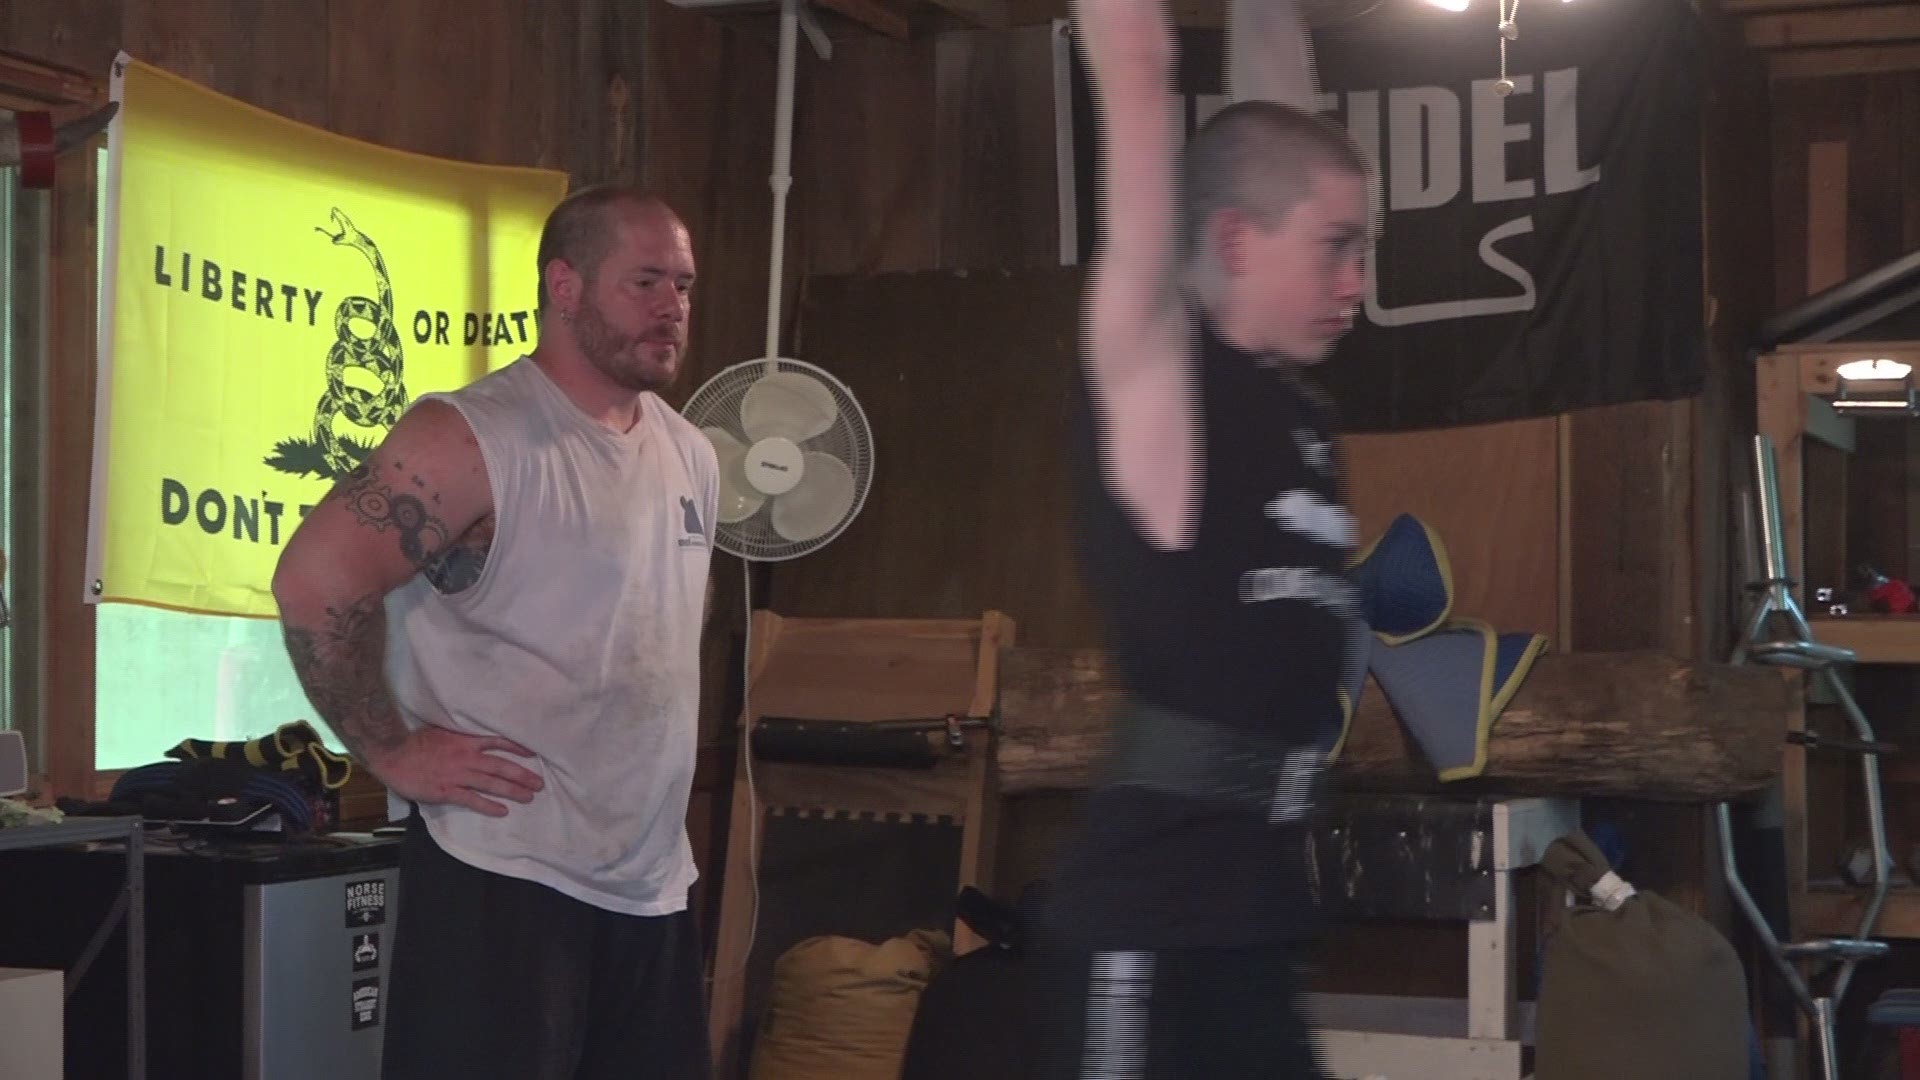 Bill and Robbie Fantegrassi will compete at the Arkansas Strongman competition at the Fairgrounds this weekend